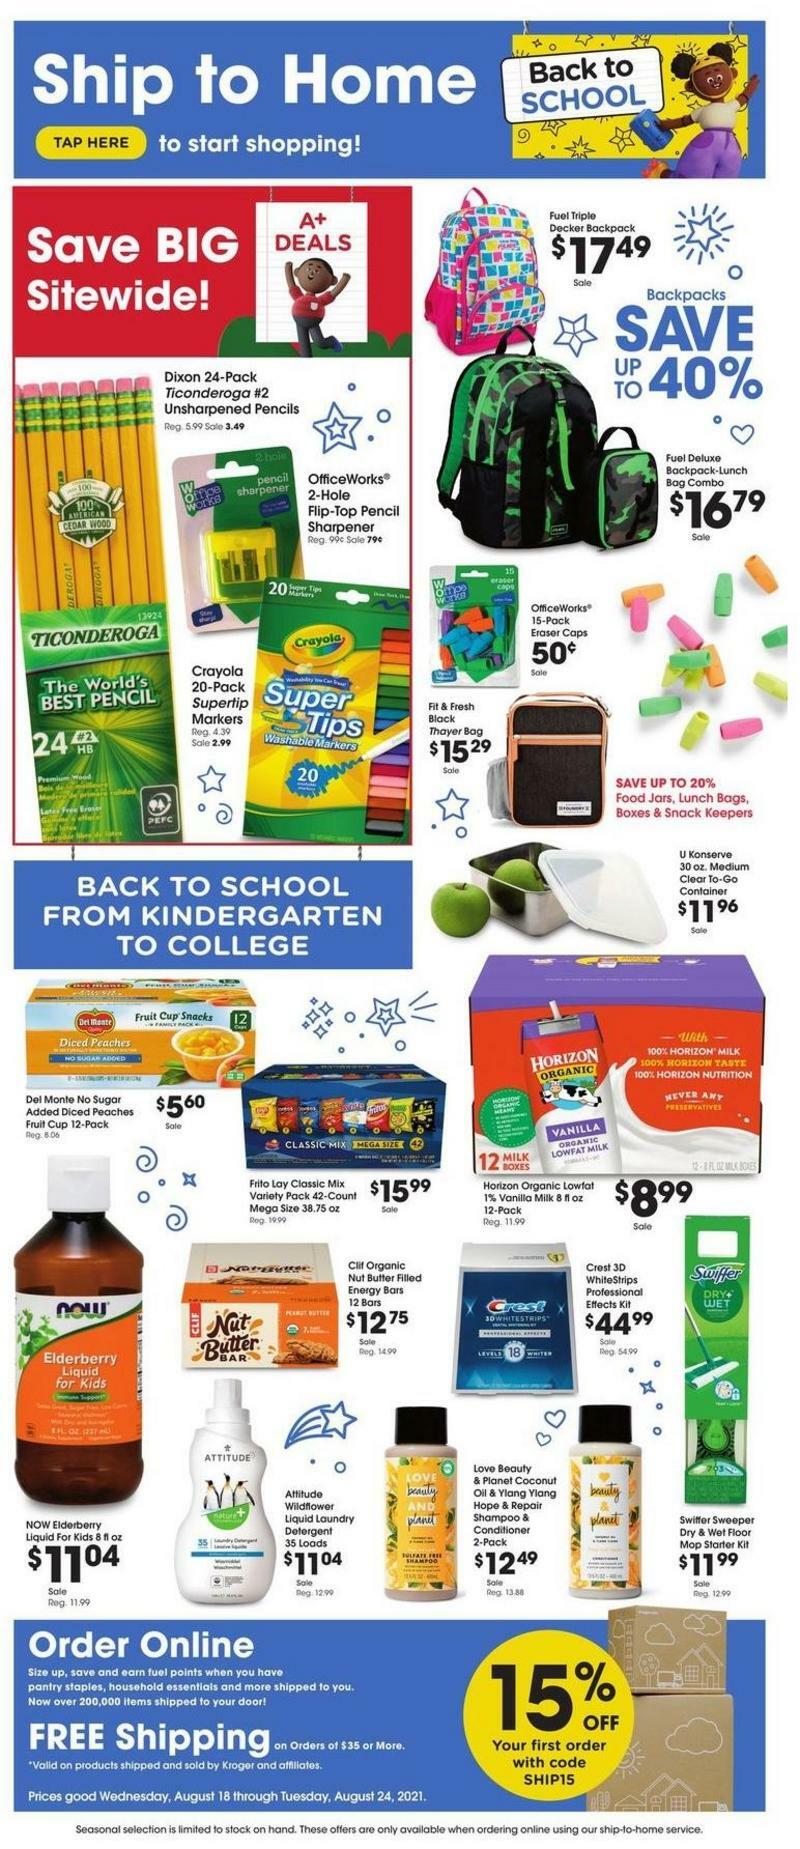 Kroger Ship to Home Weekly Ad from August 18